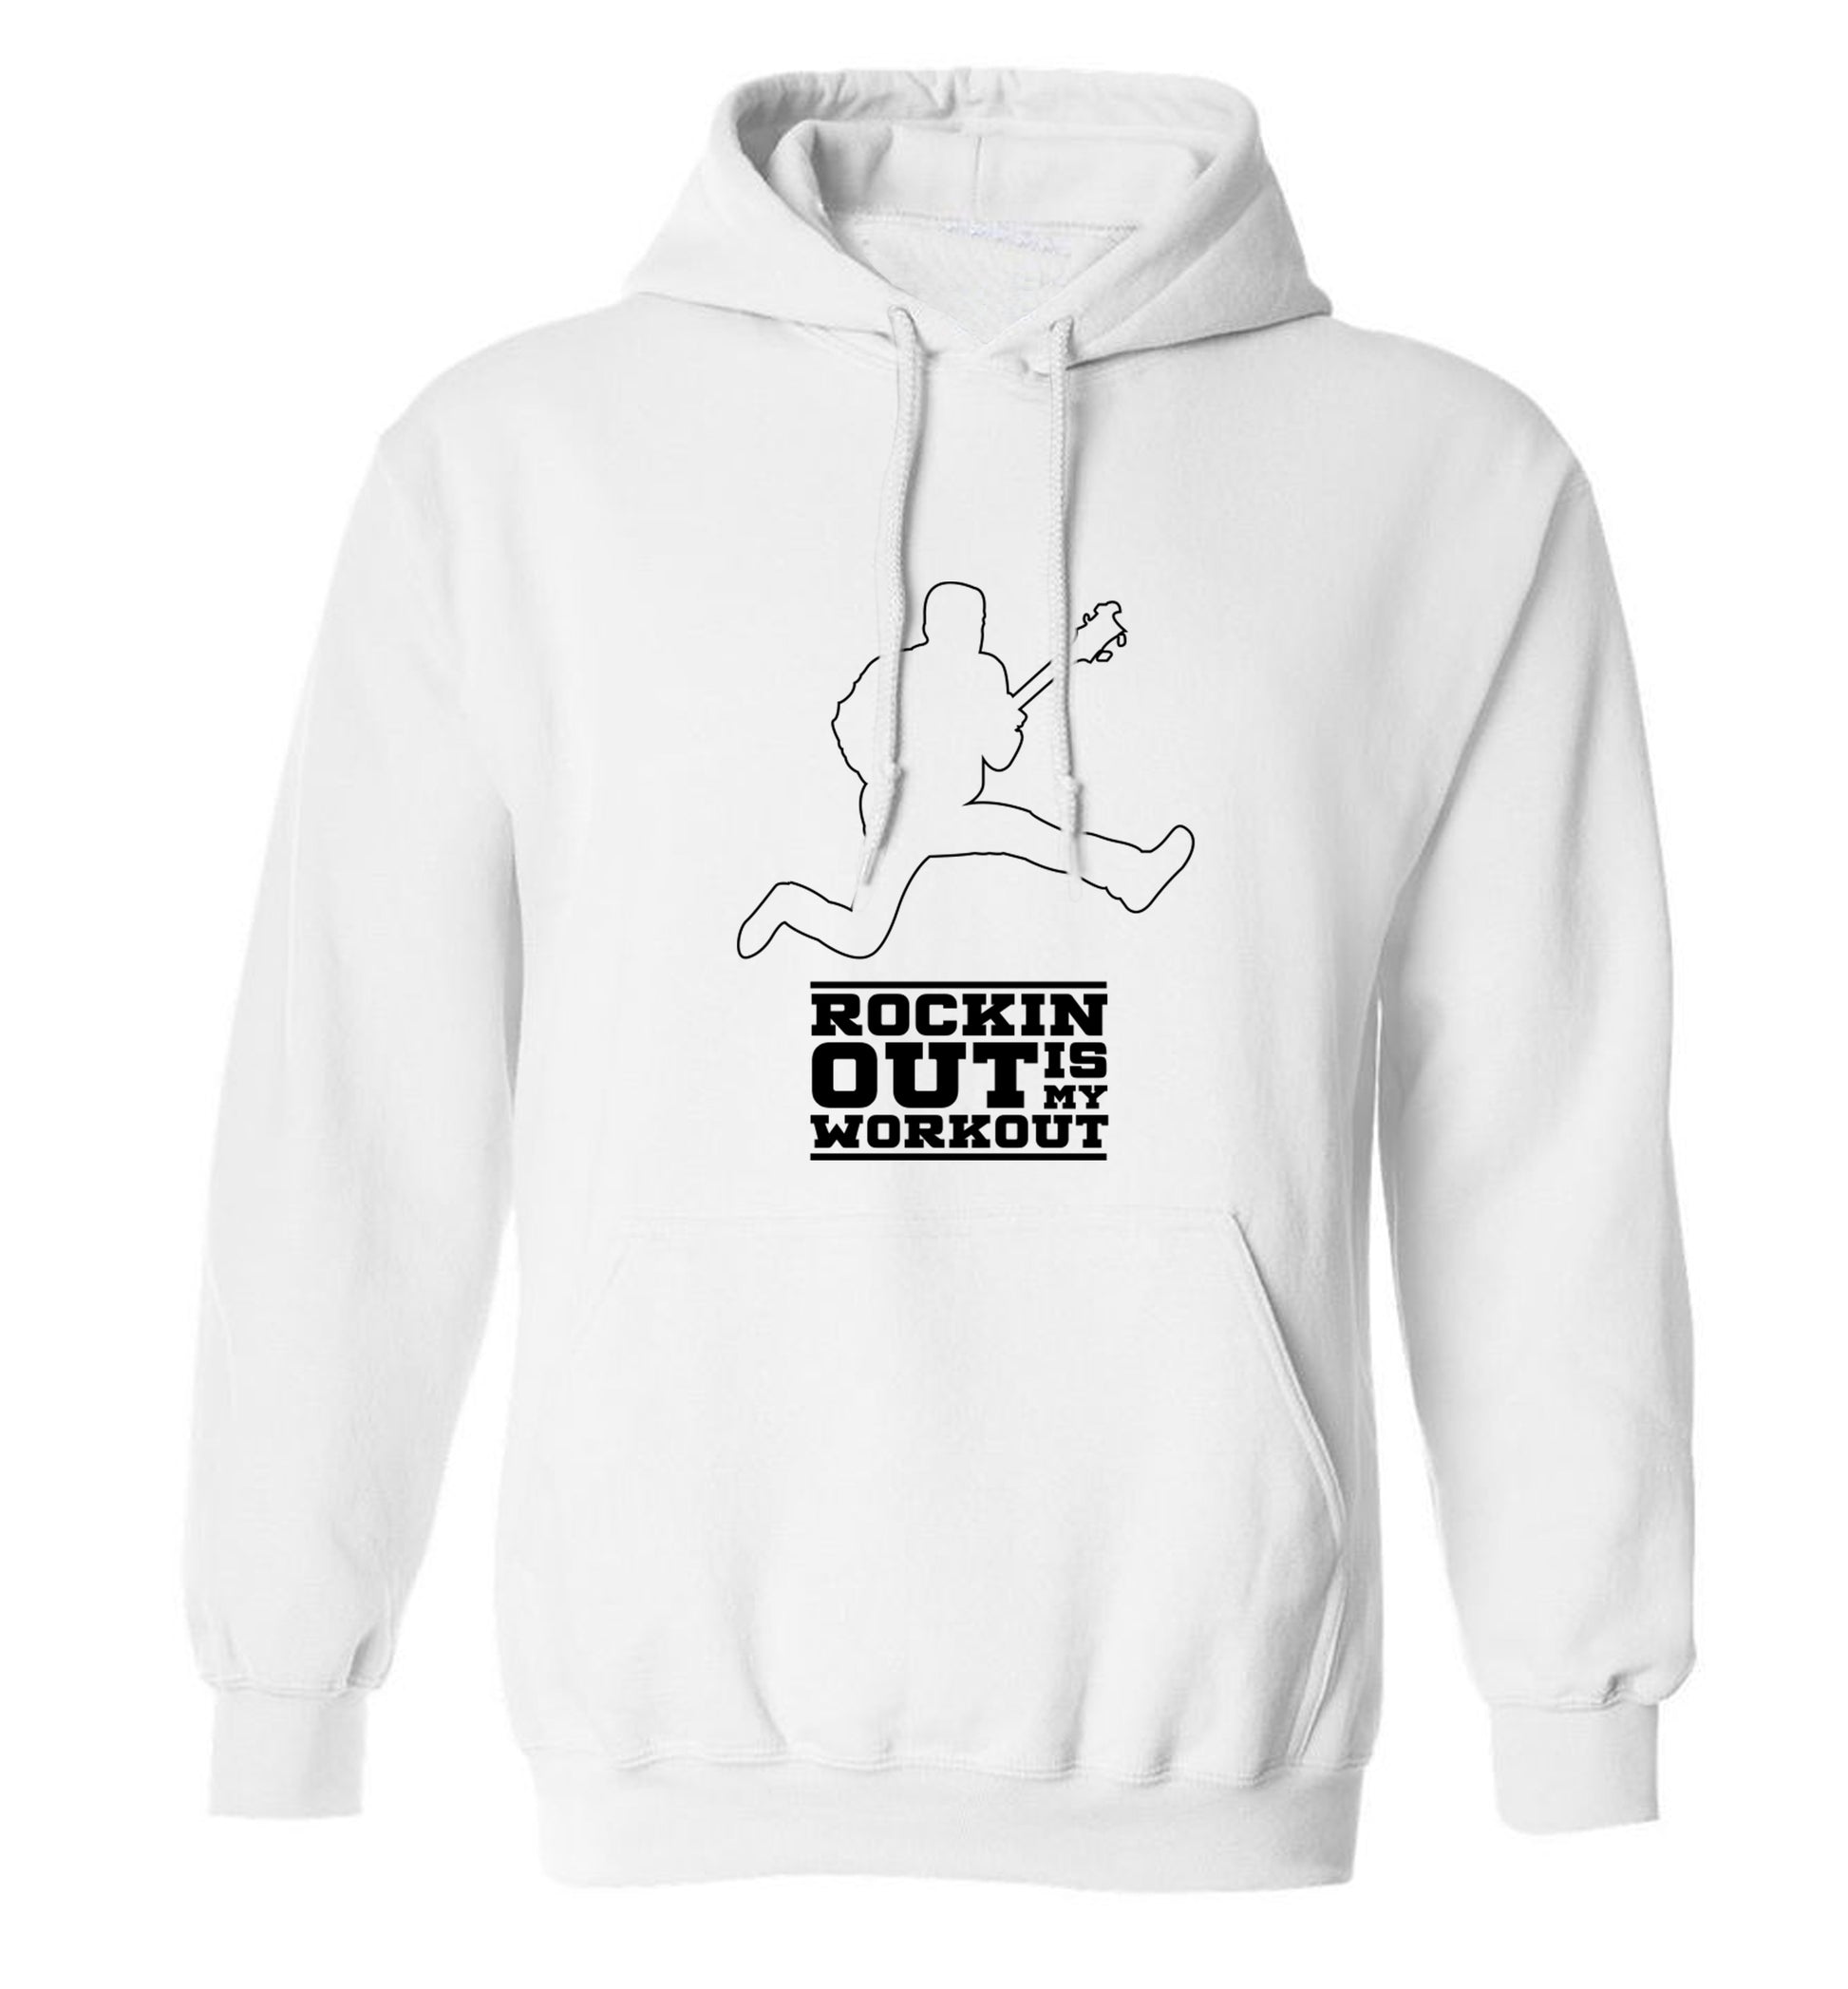 Rockin out is my workout 2 adults unisex white hoodie 2XL